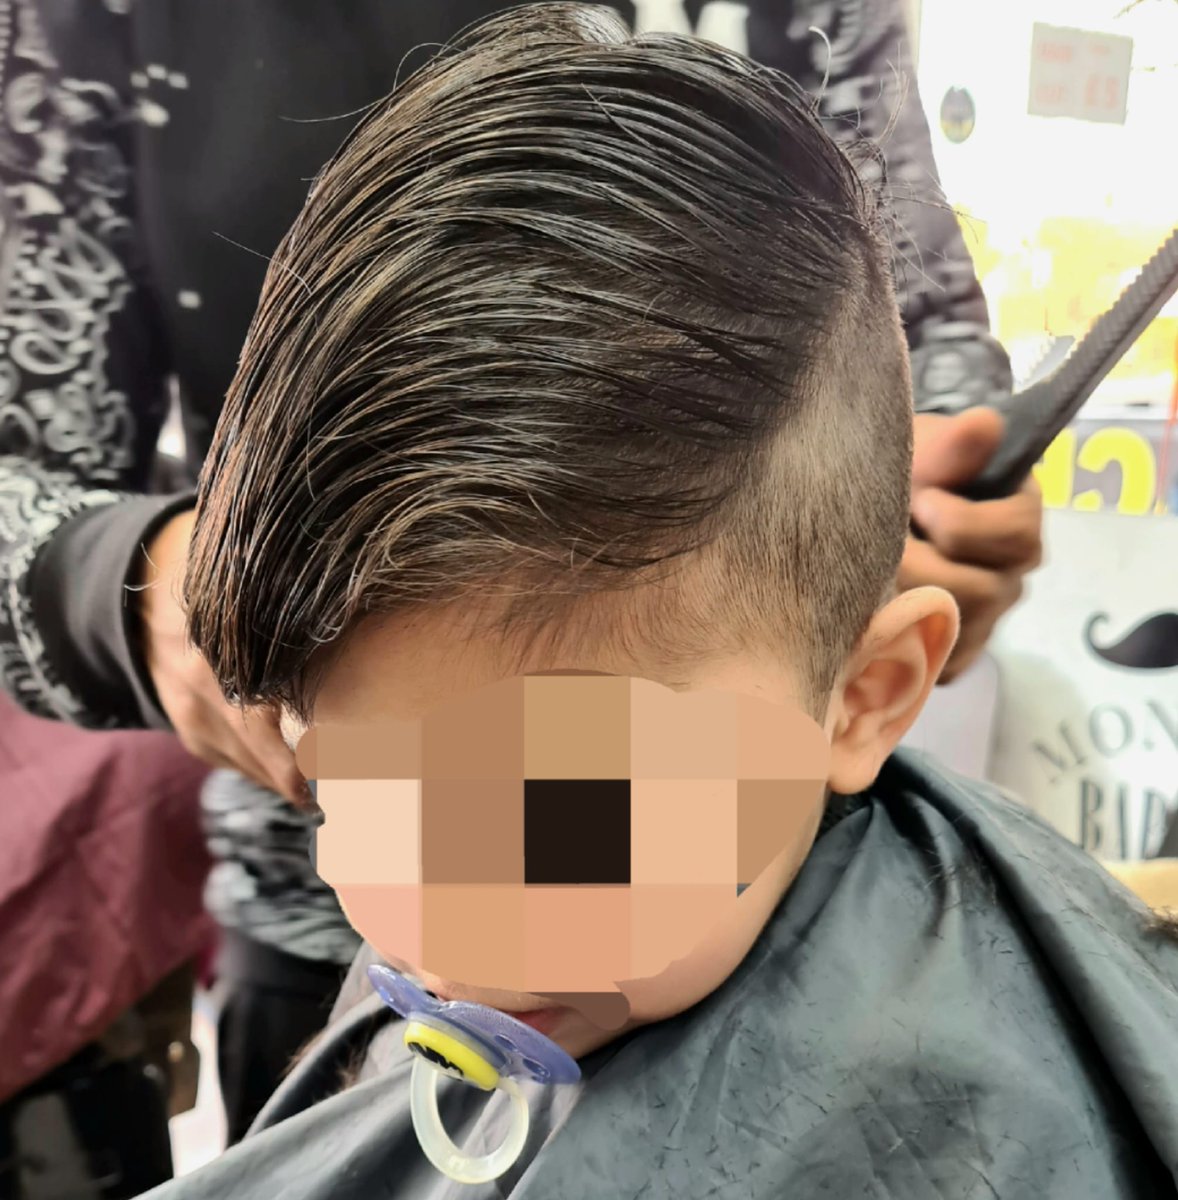 So my son had a haircut today. Kid turned up looking like Tommy Shelby. He looks like he should be living on the Oriel Estate (no offence Oriel Estate, don't come for me). Still the cutest little monster in the world. #parenting #proudmummy